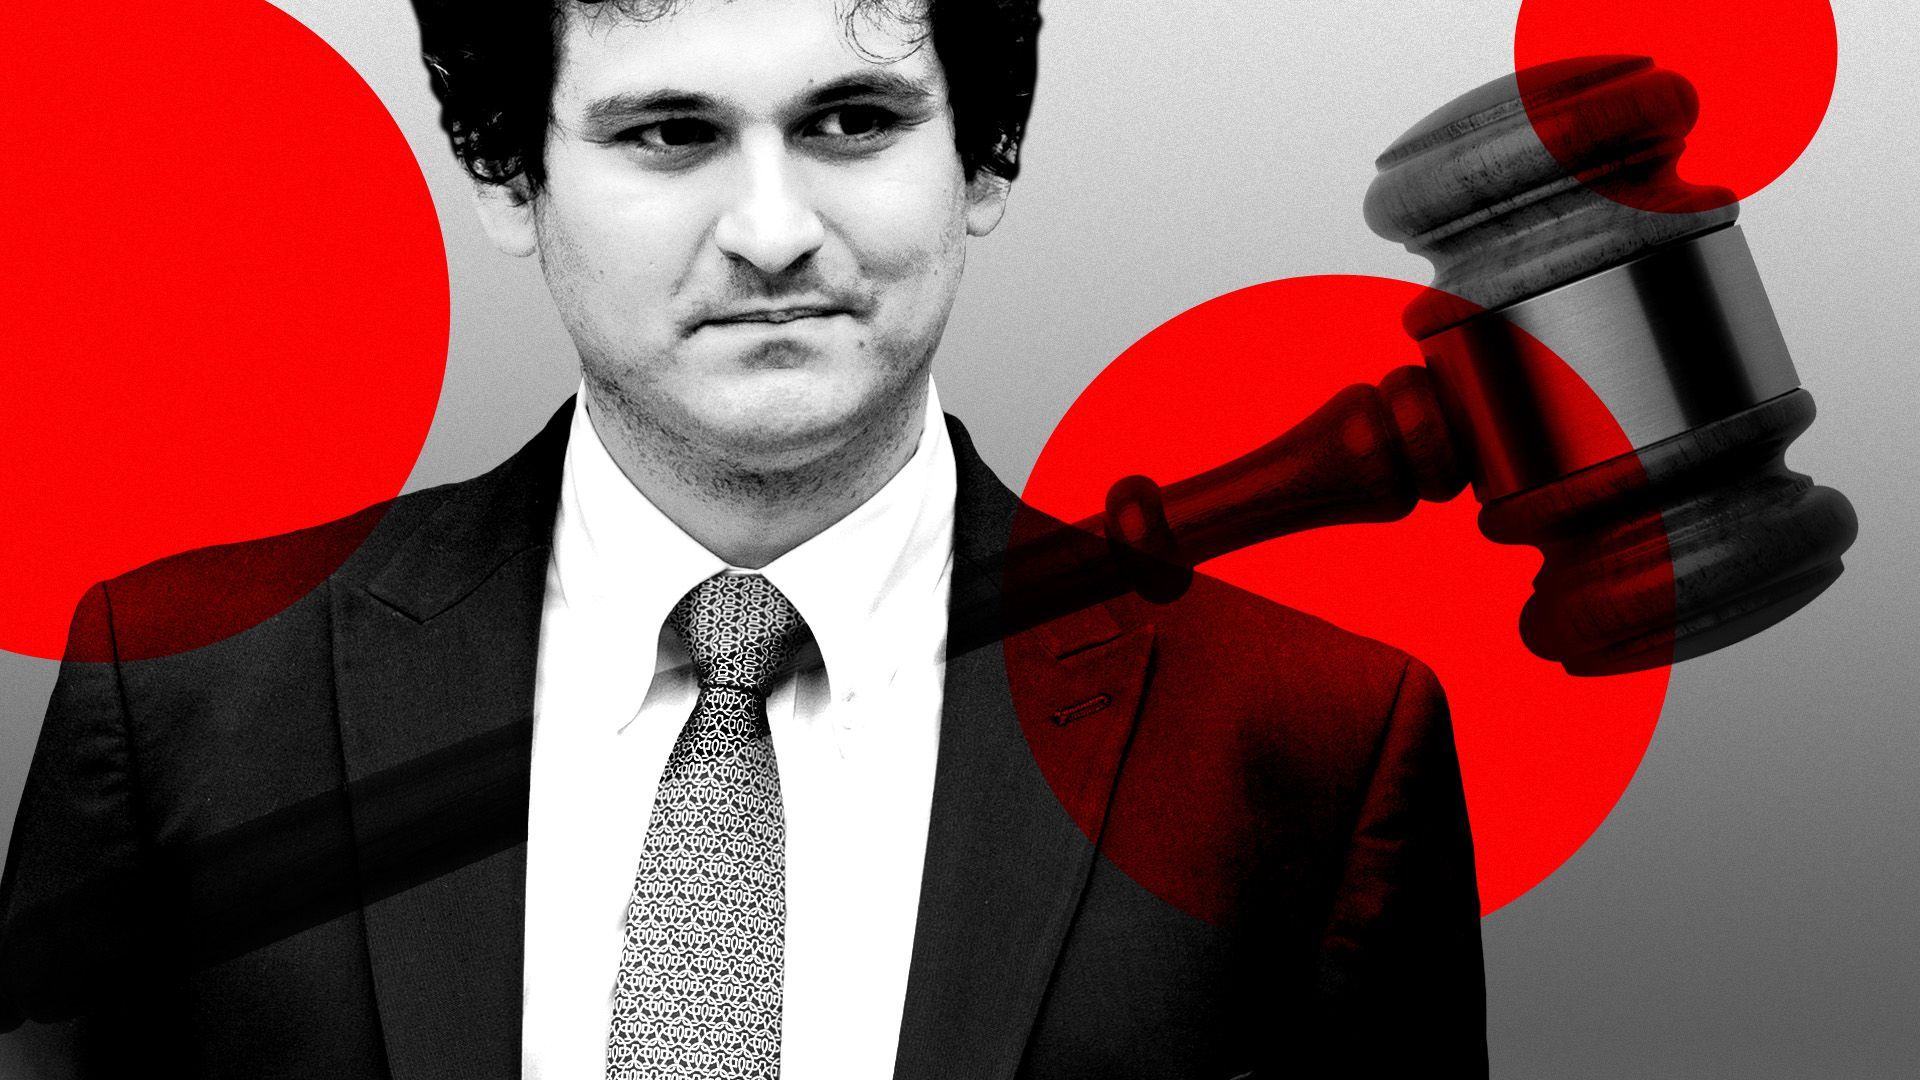 Photo illustration of Sam Bankman-Fried with a gavel and red circles